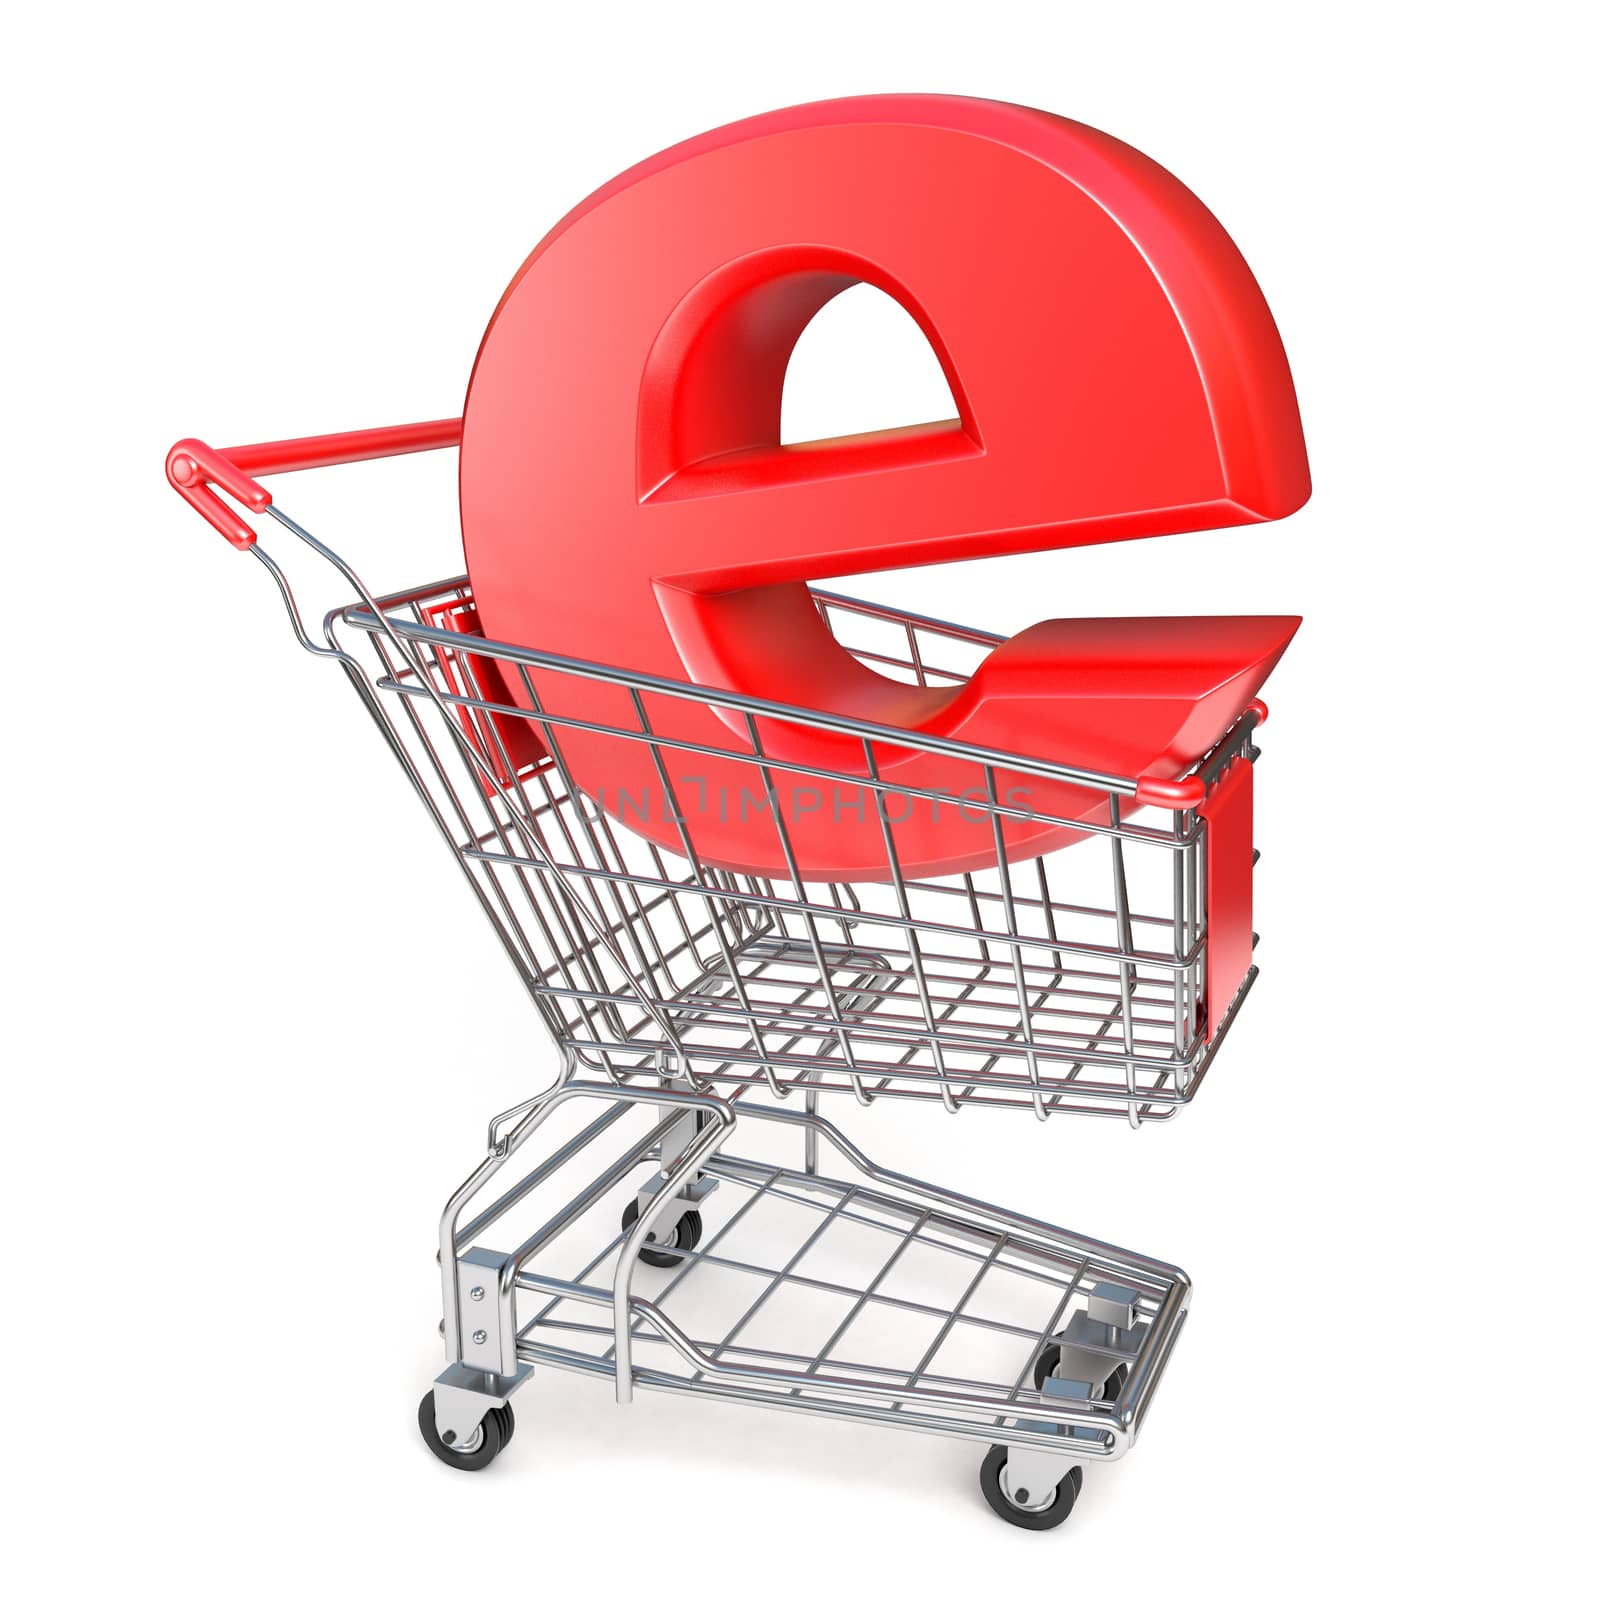 Shopping cart and E symbol. E-shop concept. 3D render illustration isolated on white background